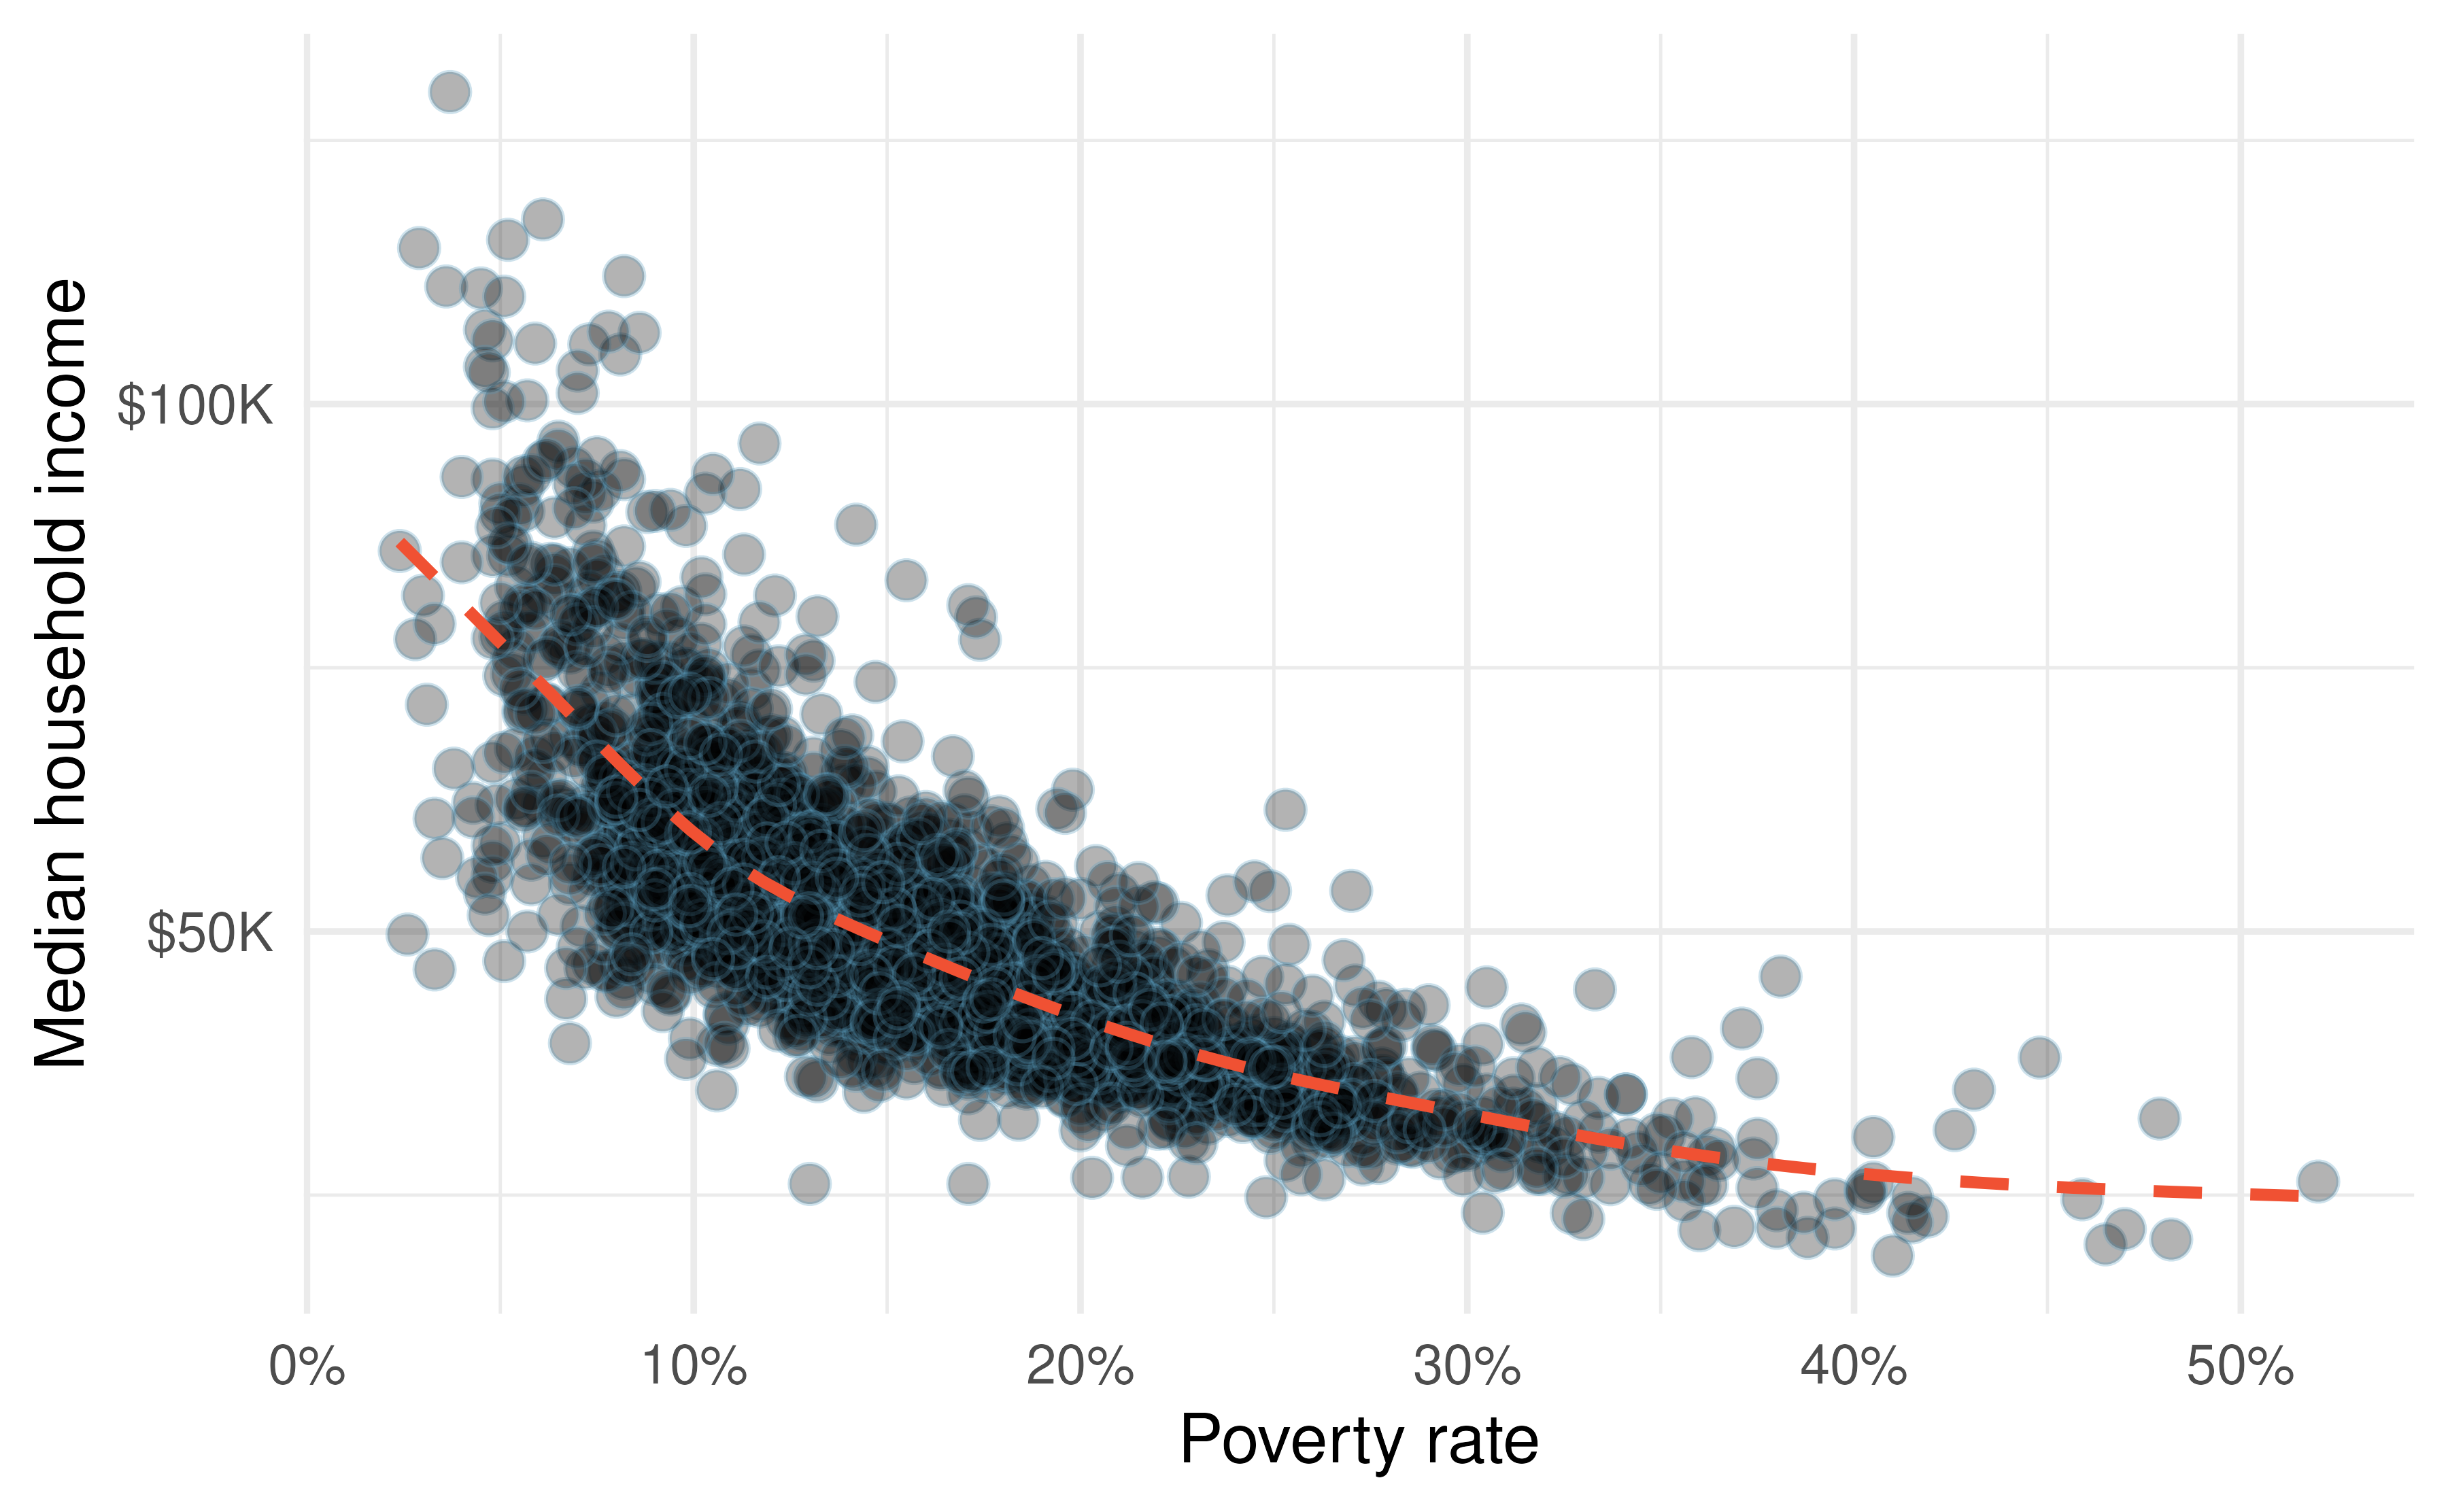 A scatterplot of the median household income against the poverty rate for the county dataset. Data are from 2017. A statistical model has also been fit to the data and is shown as a dashed line.